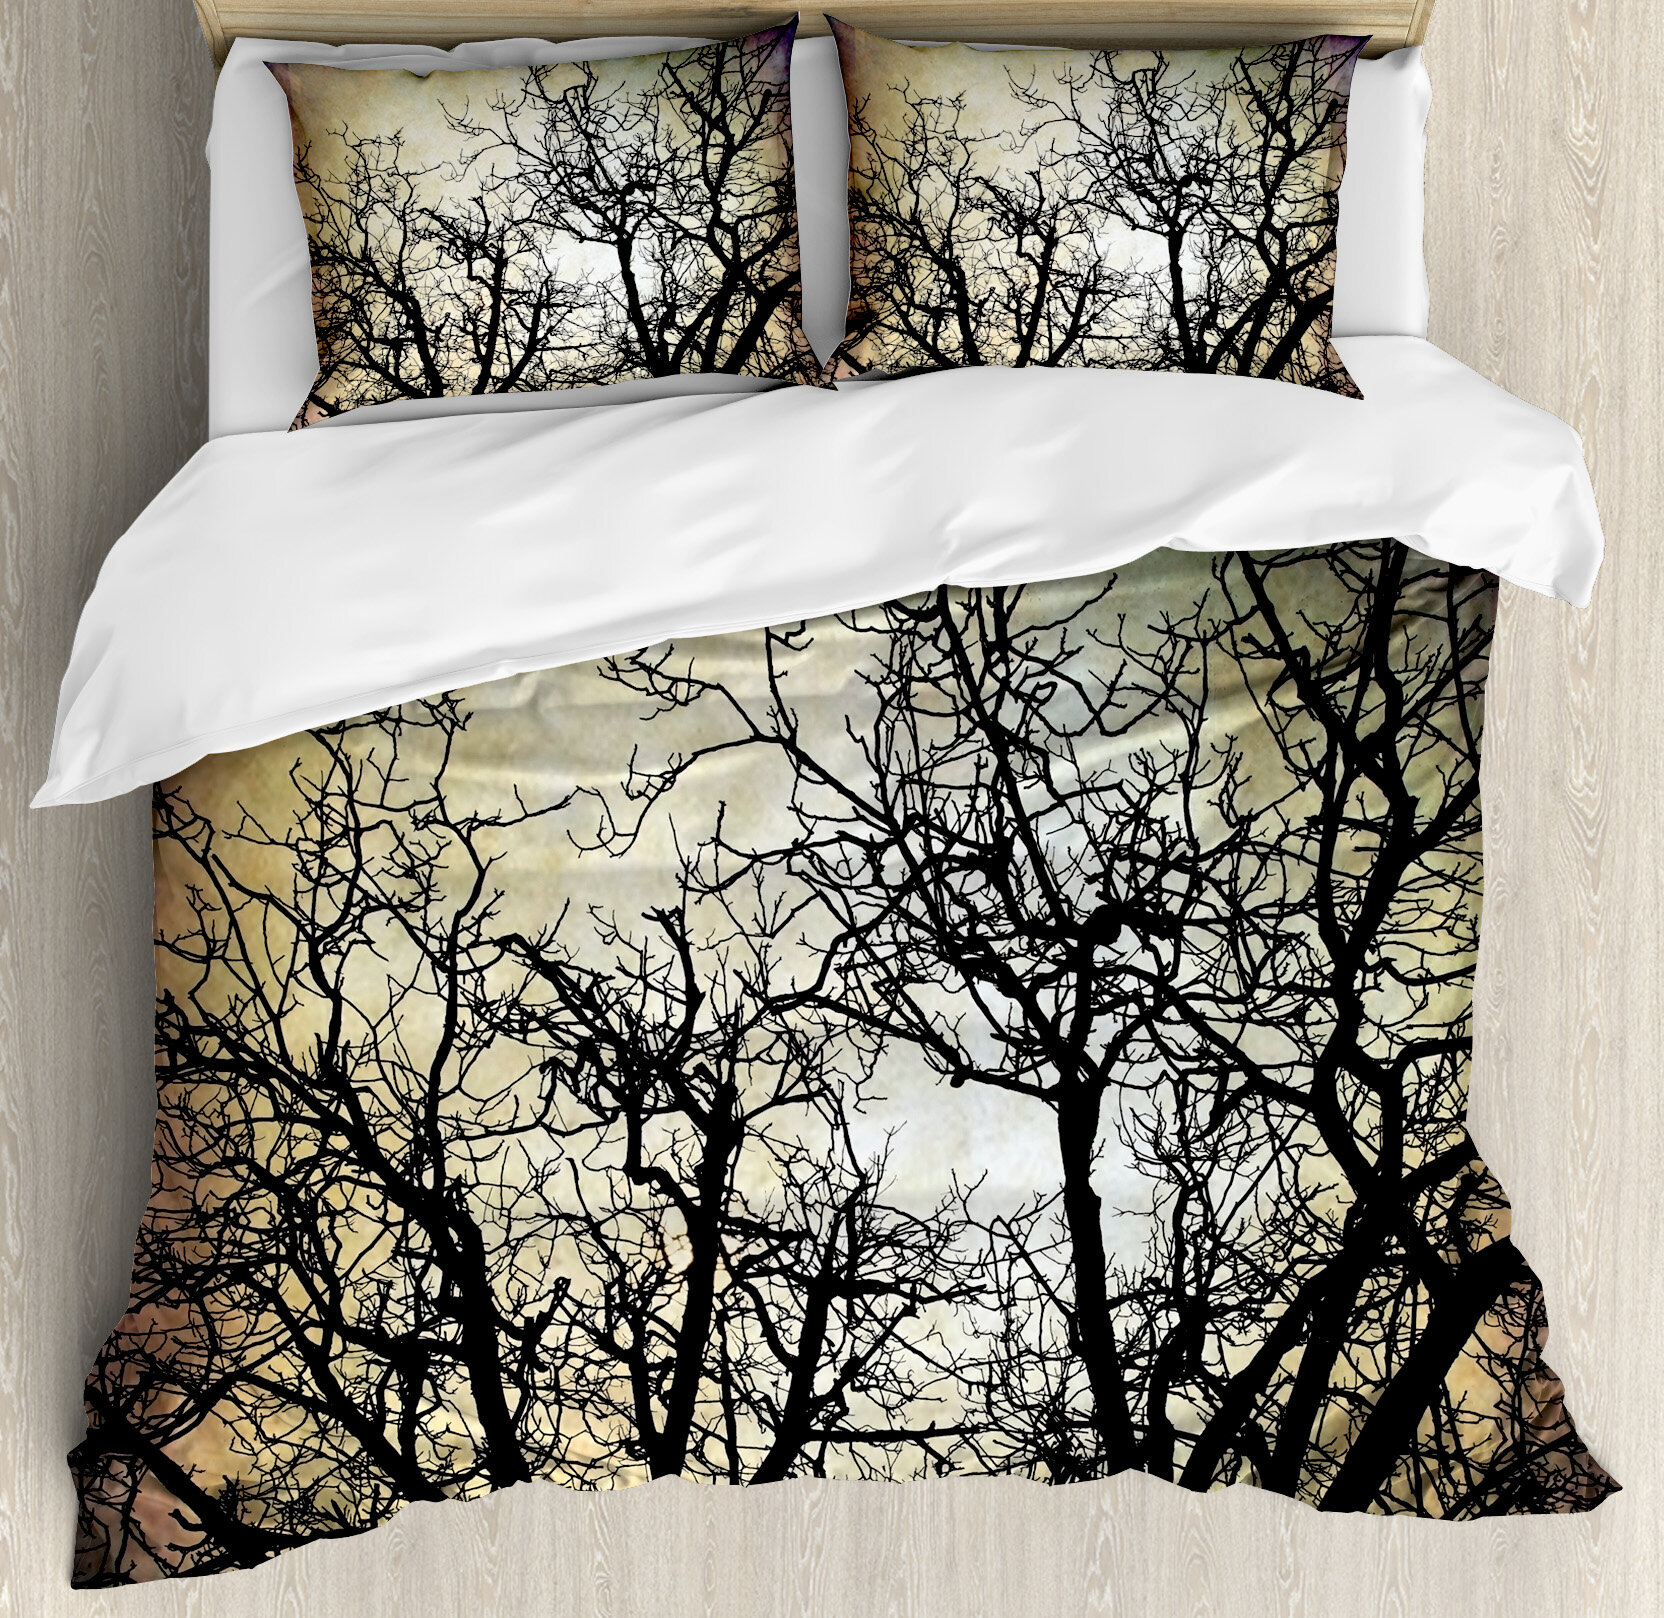 East Urban Home Horror Scary Twilight Scene With Grunge Tree